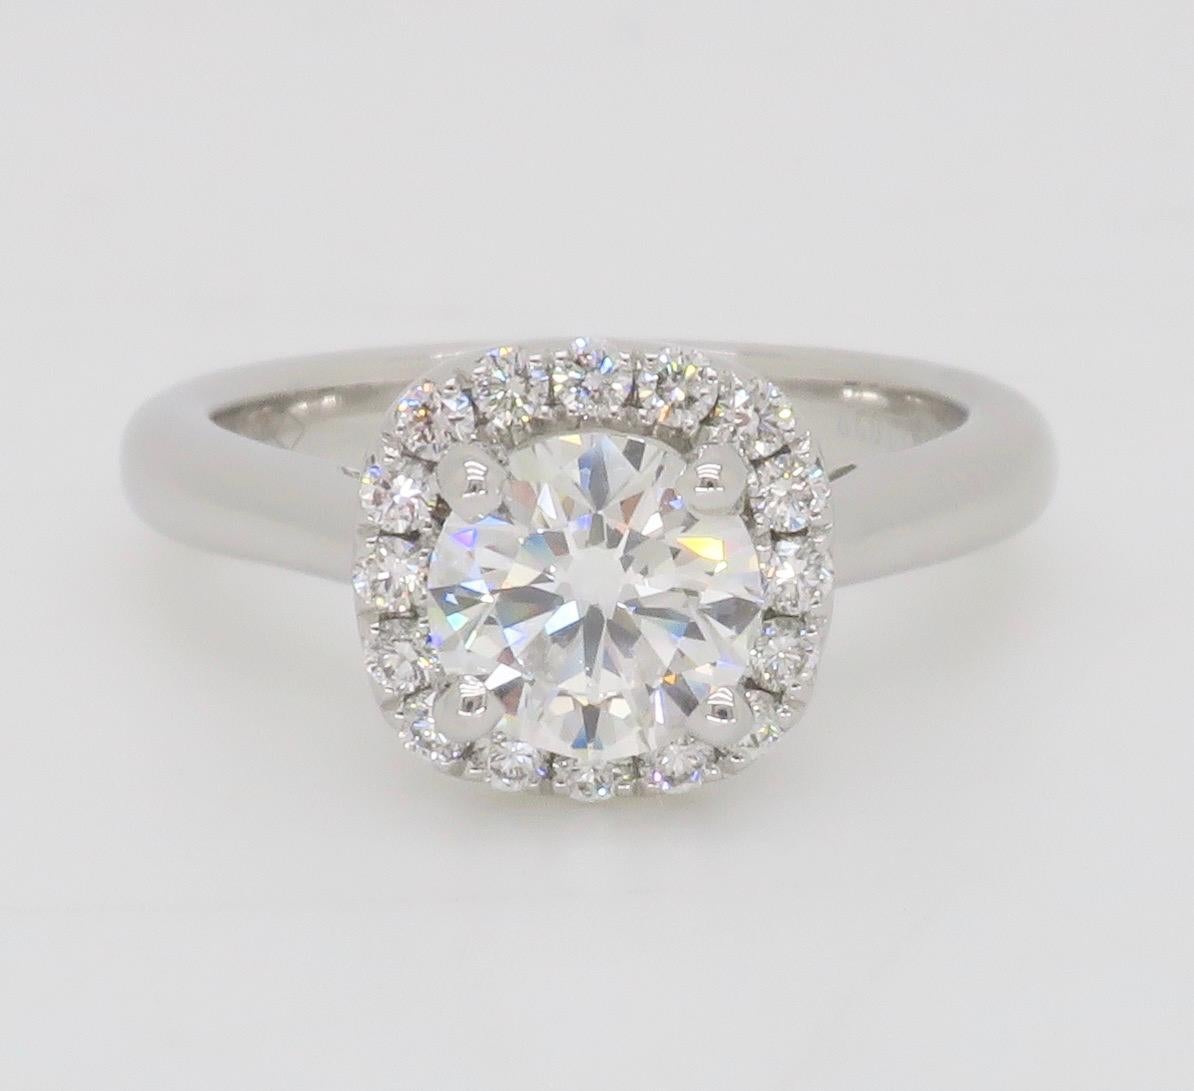 GIA Certified Round Brilliant Cut Diamond in a Stunning Scott Kay Halo Setting  For Sale 8